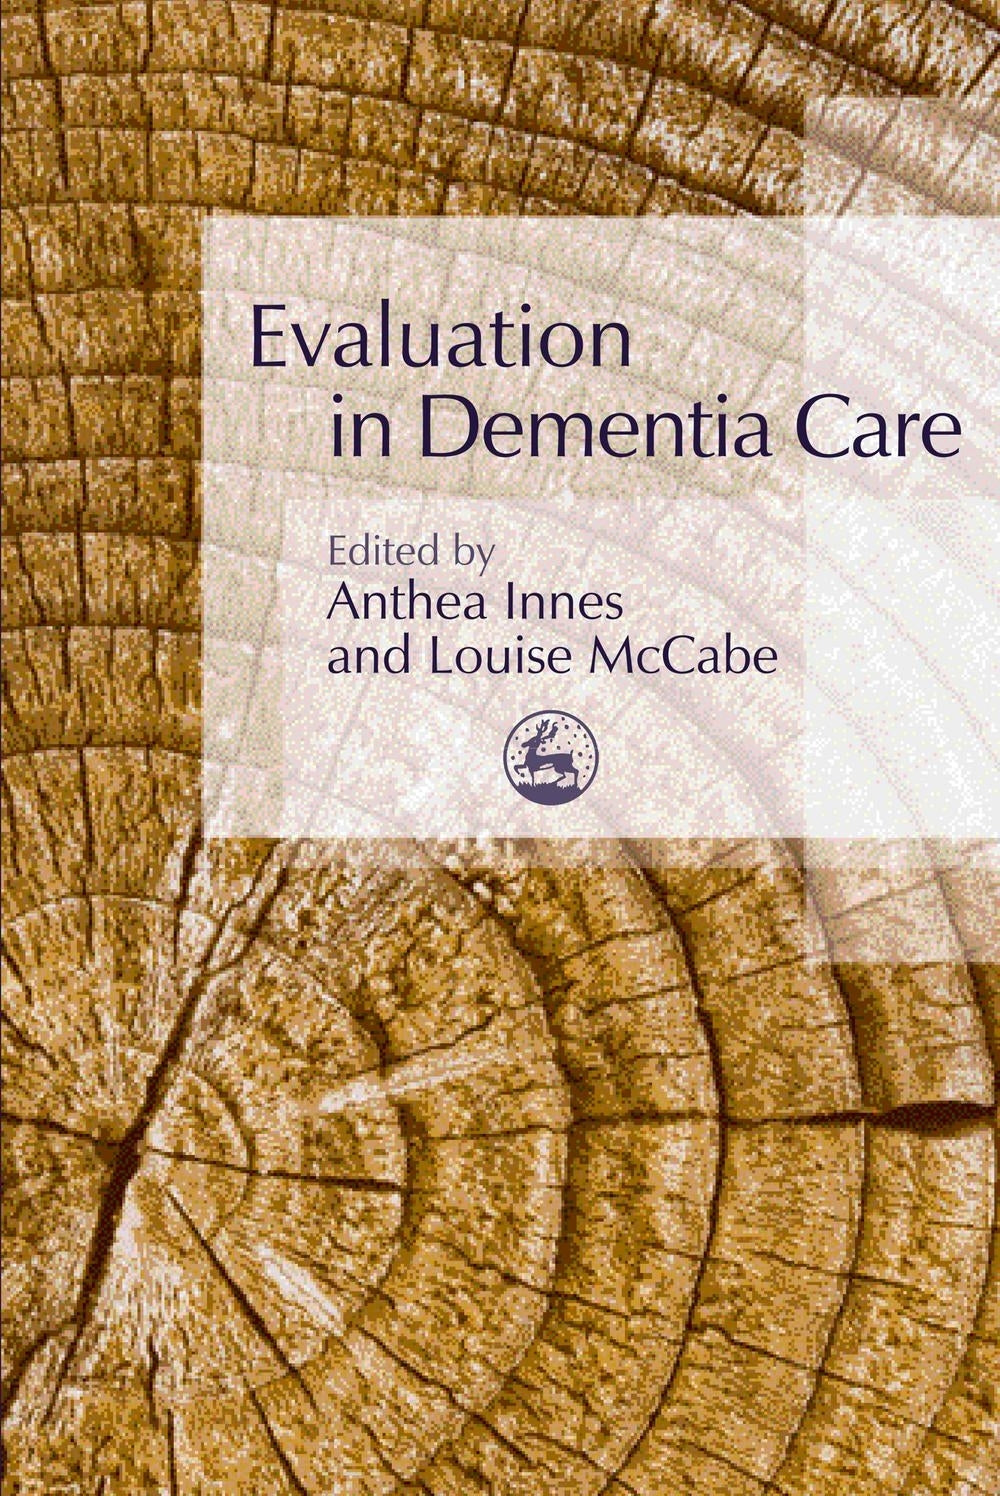 Evaluation in Dementia Care by Louise McCabe, Anthea Innes